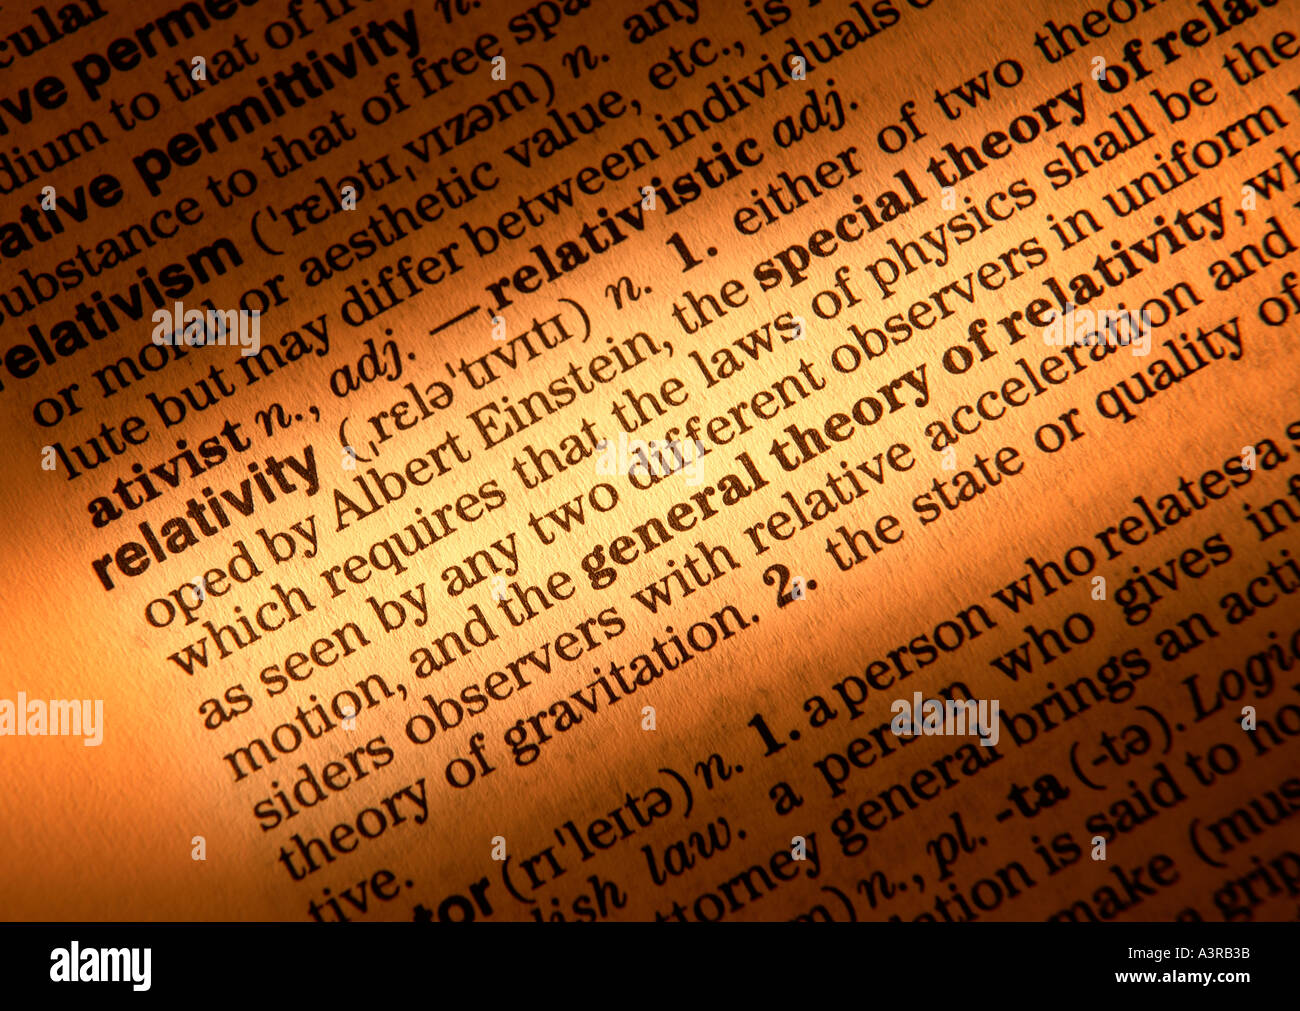 CLOSE UP OF DICTIONARY PAGE SHOWING DEFINITION OF THE WORD RELATIVITY Stock Photo